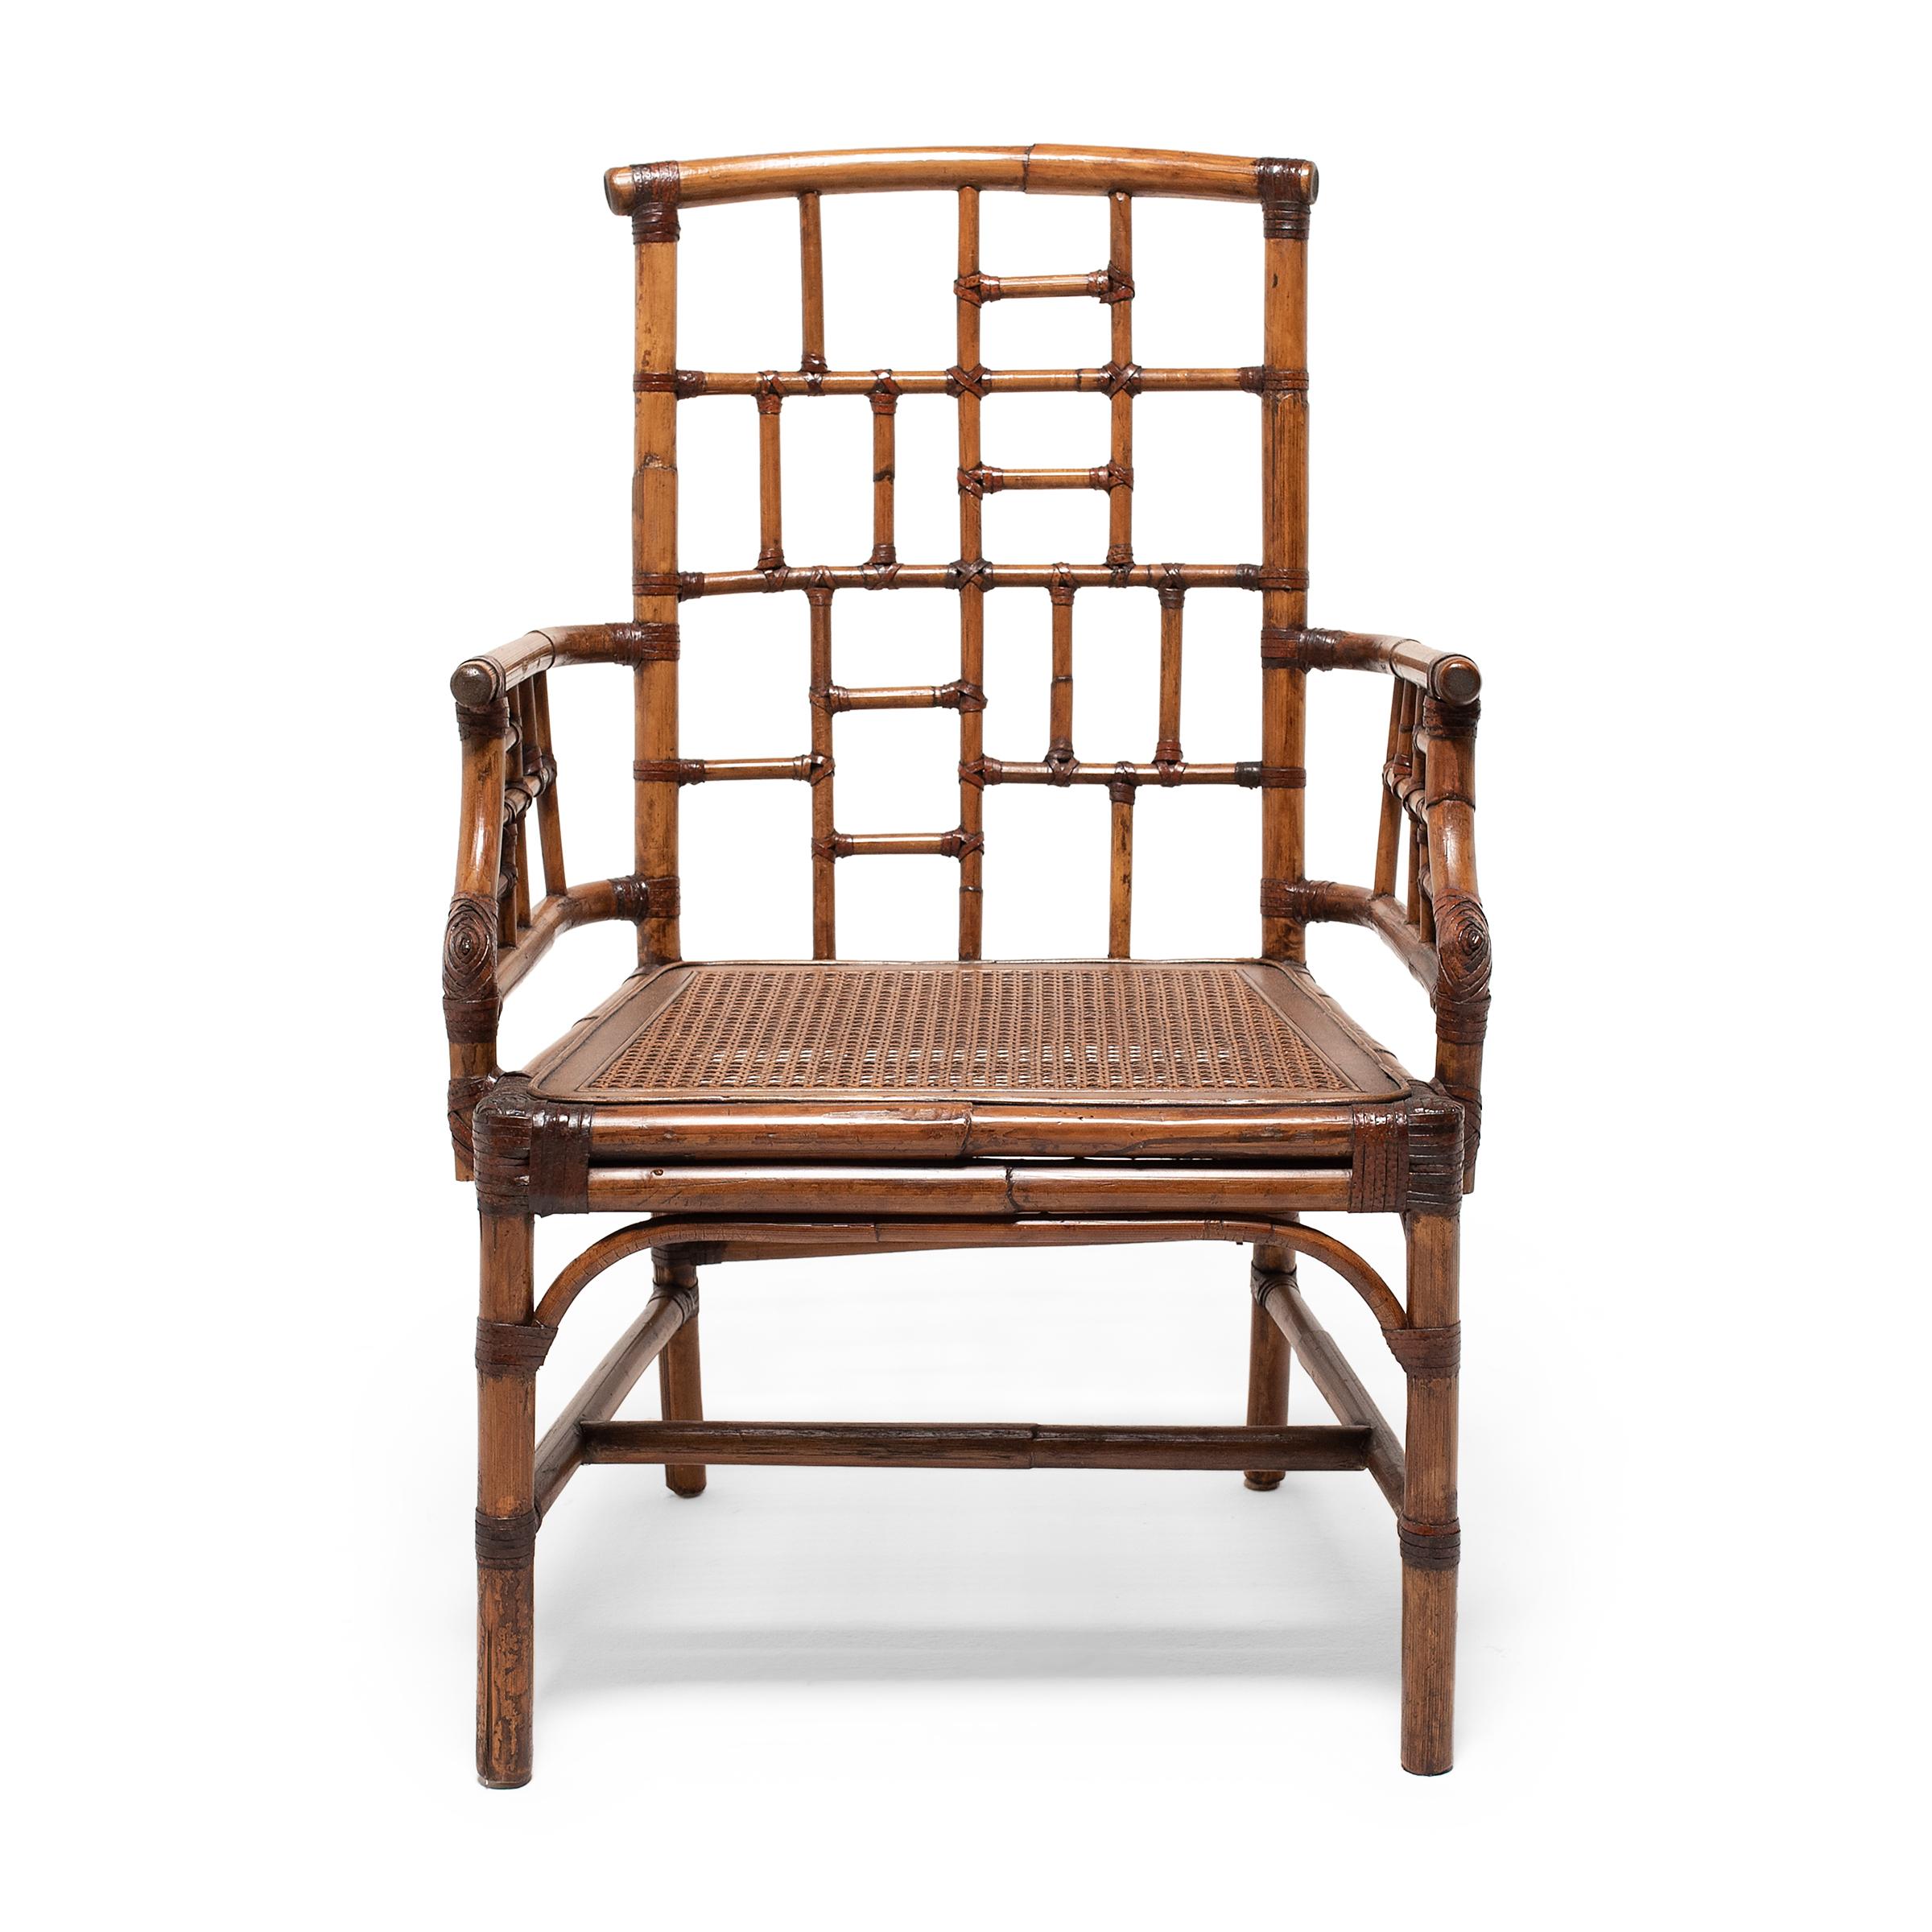 This tall-back bamboo armchair is designed after the traditional 'southern official's hat chair,' defined by high rectangular backs, shortened arm railings, and no protruding crest rail. The chair is crafted of bamboo that has been carefully steamed